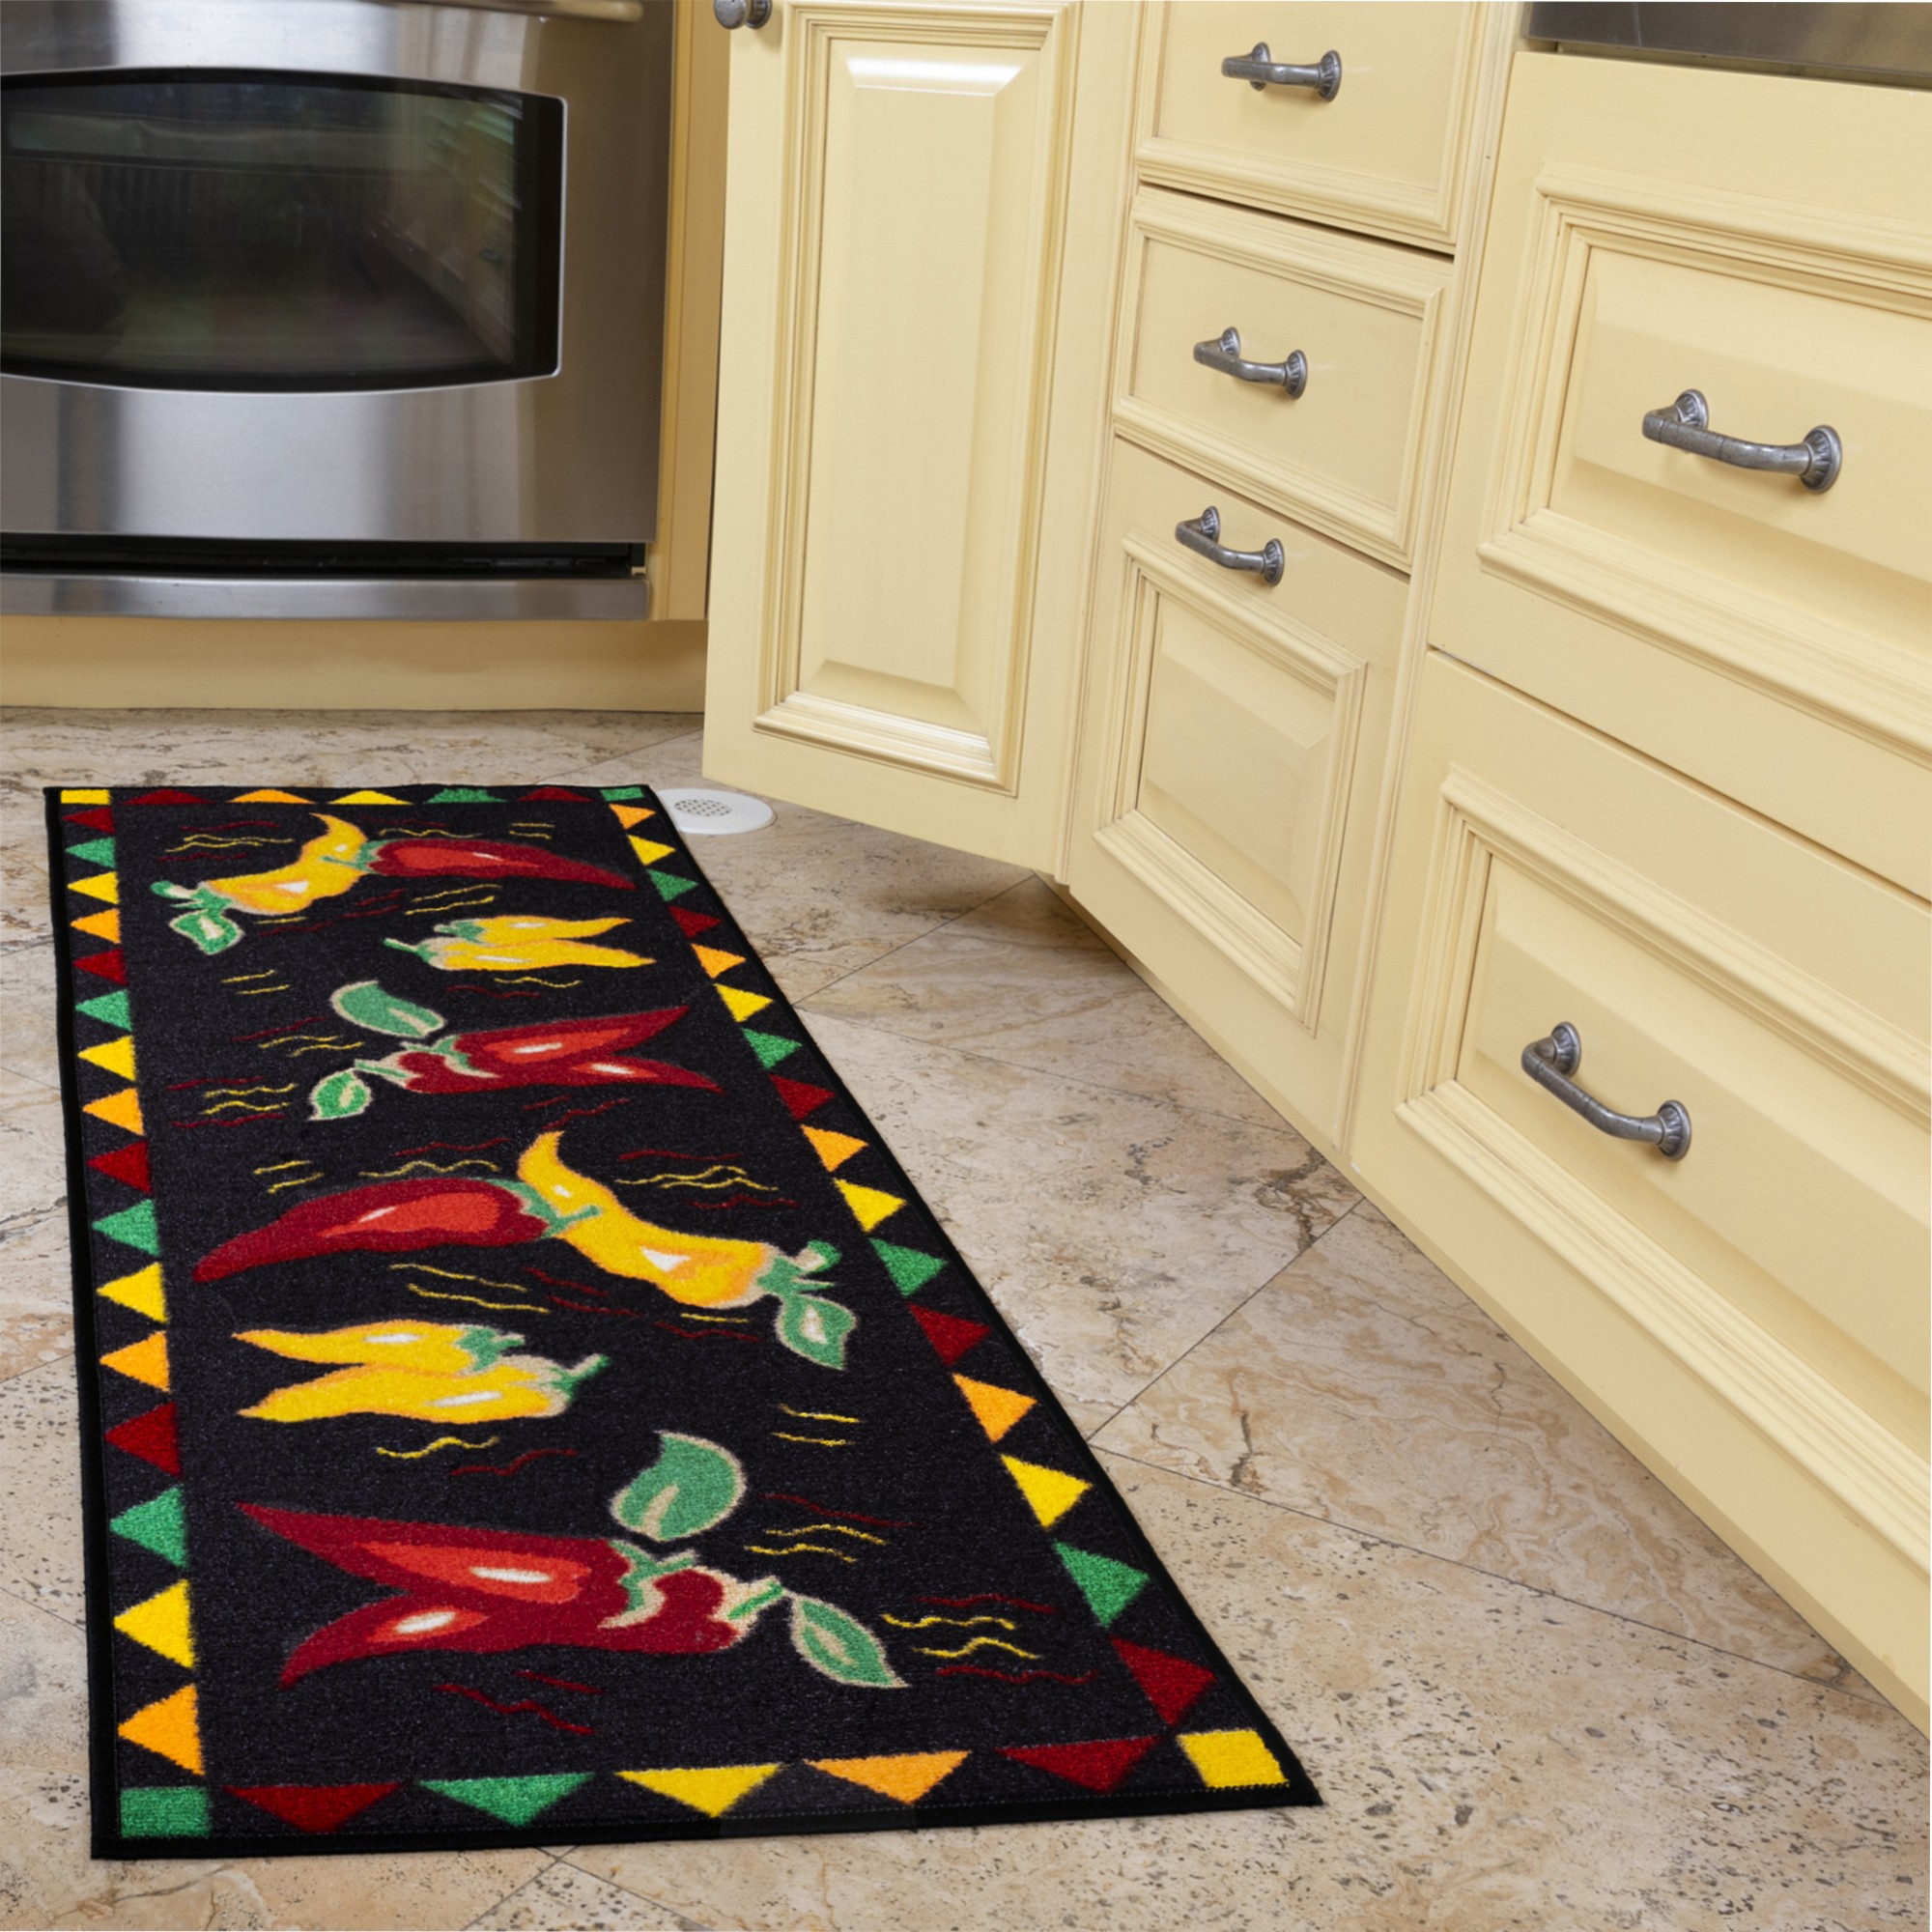 10 Best Kitchen Rugs for 2021 Ideas on Foter